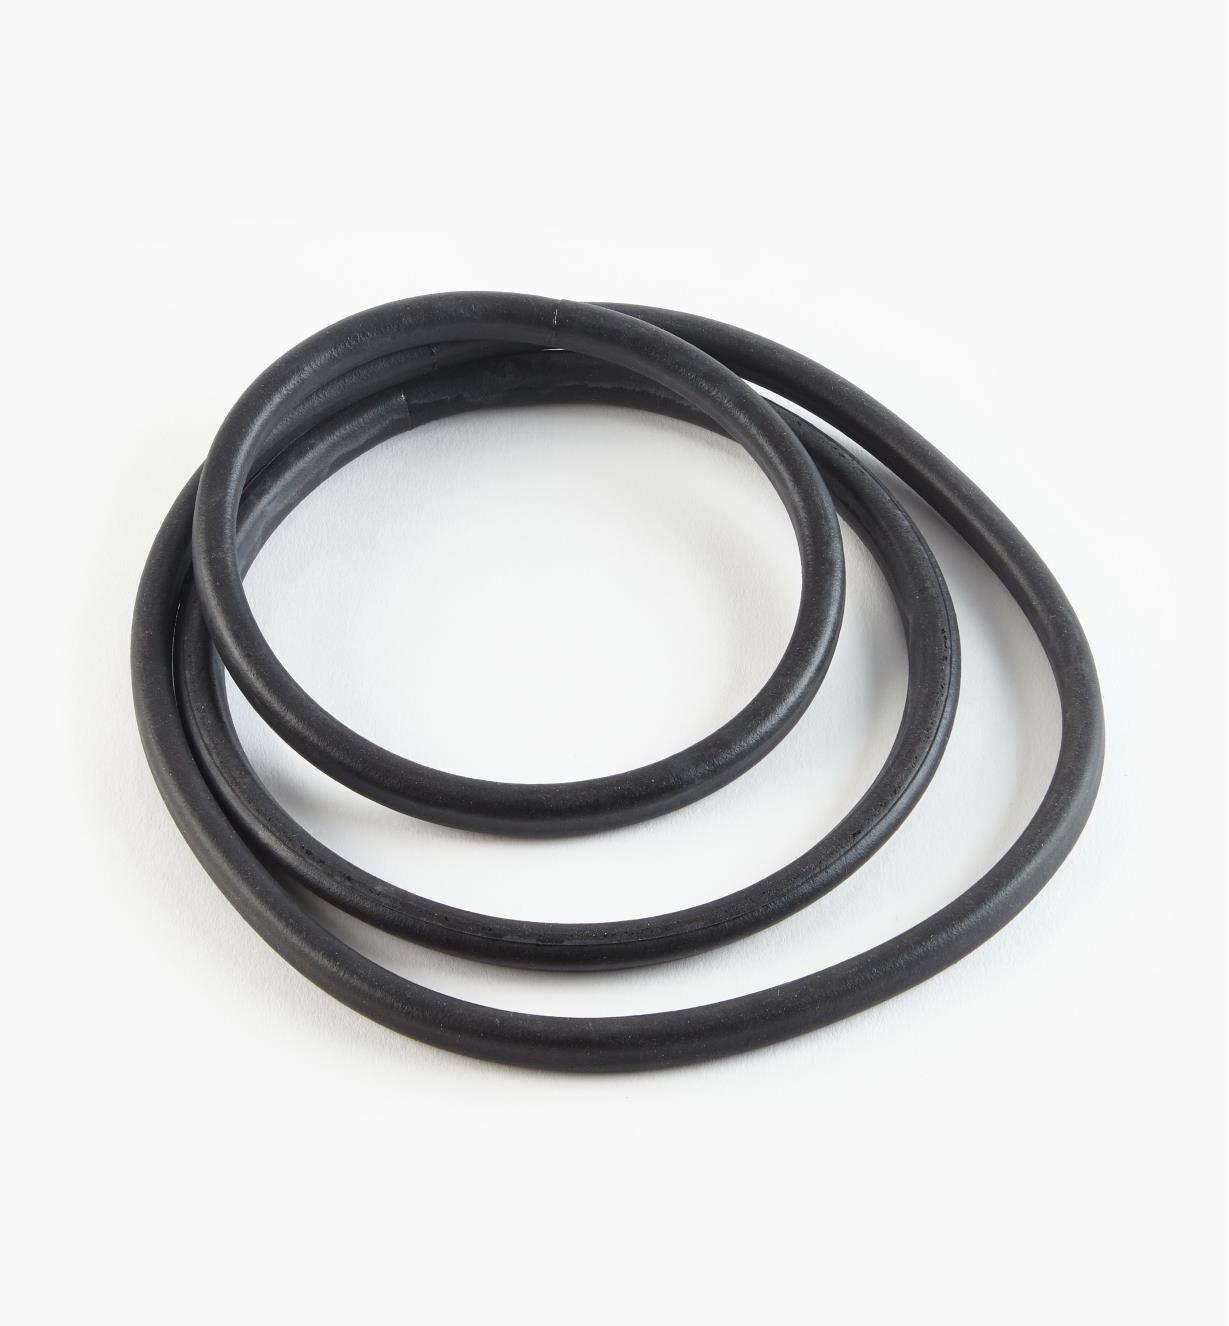 55K6757 - Replacement Gaskets, pkg. of 3